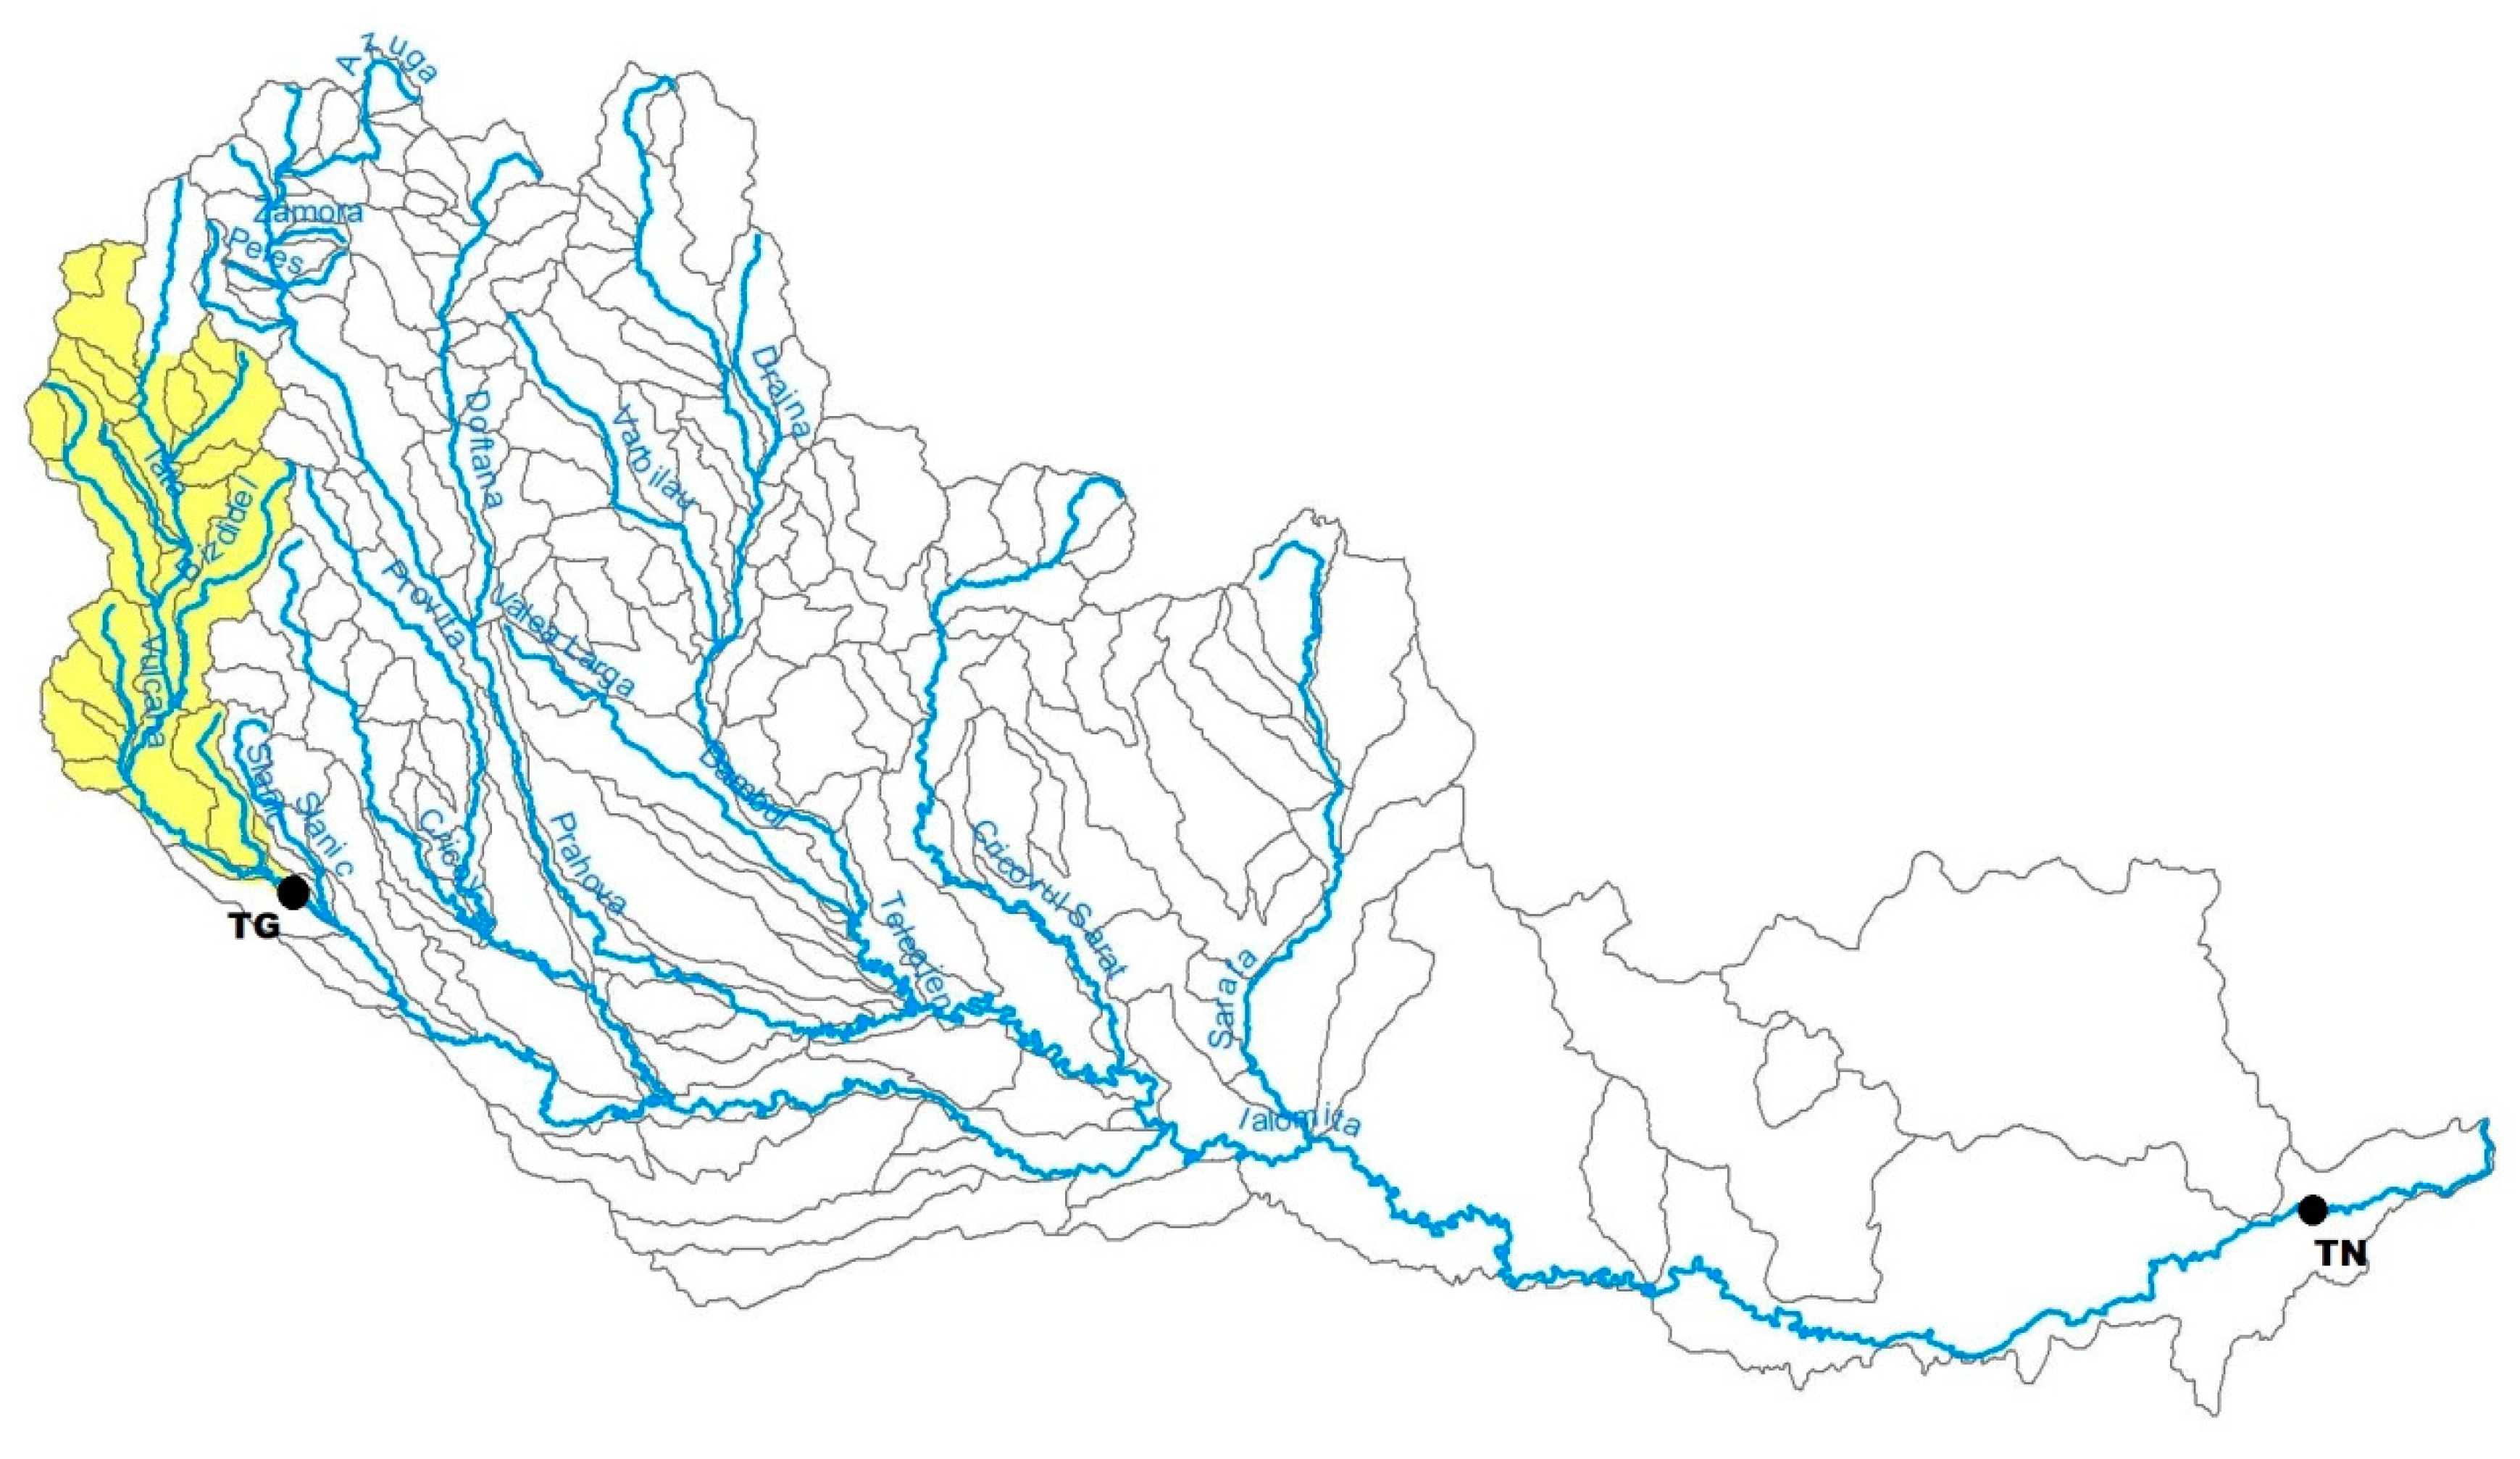 Water | Free Full-Text | Evaluation of Water Quality in Ialomita River  Basin in Relationship with Land Cover Patterns | HTML